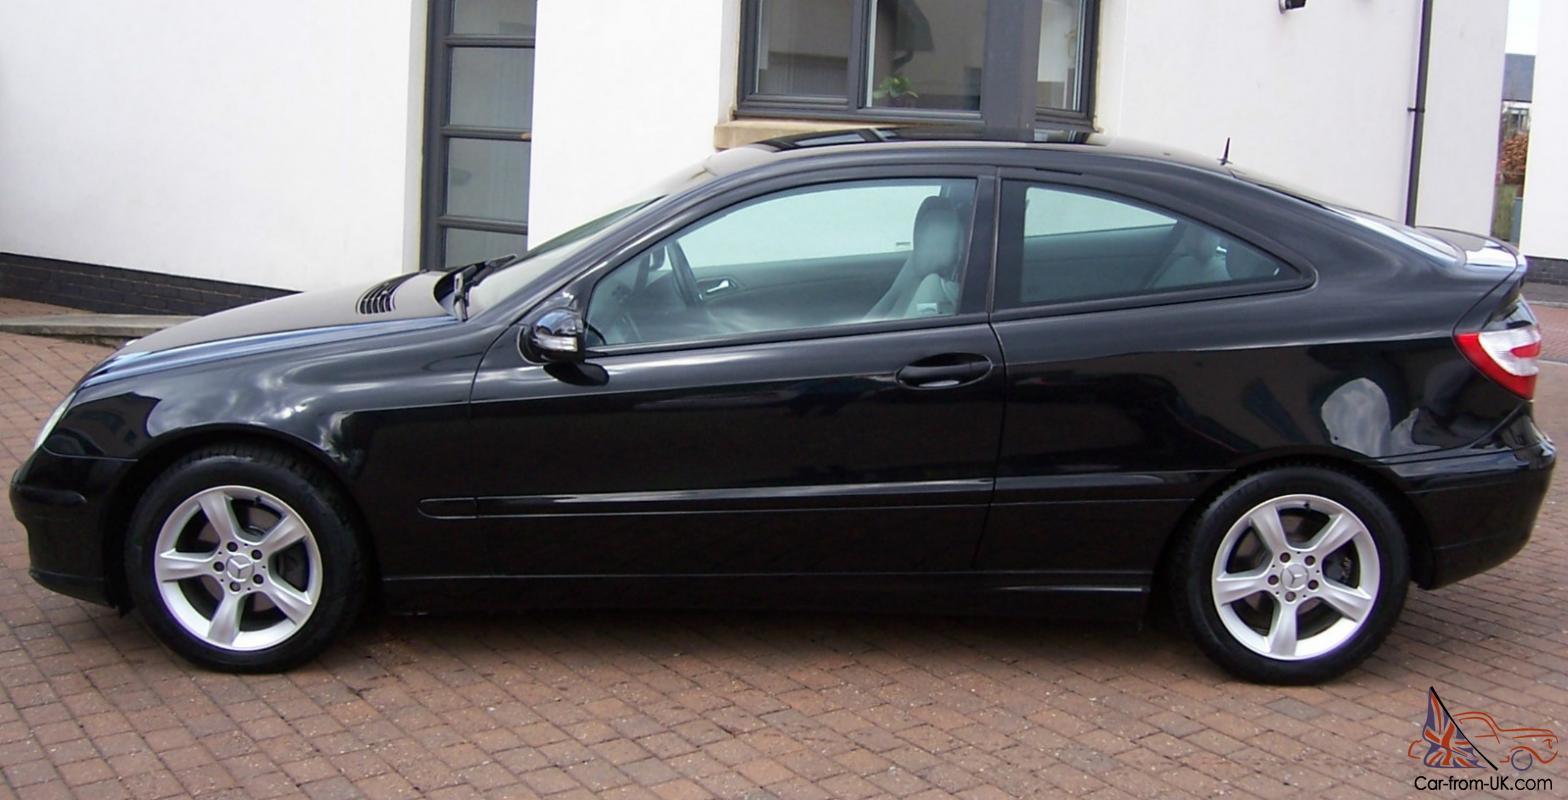 MERCEDES C180 KOMPRESSOR SE AUTOMATIC SPORTS COUPE ONLY 34000 Miles